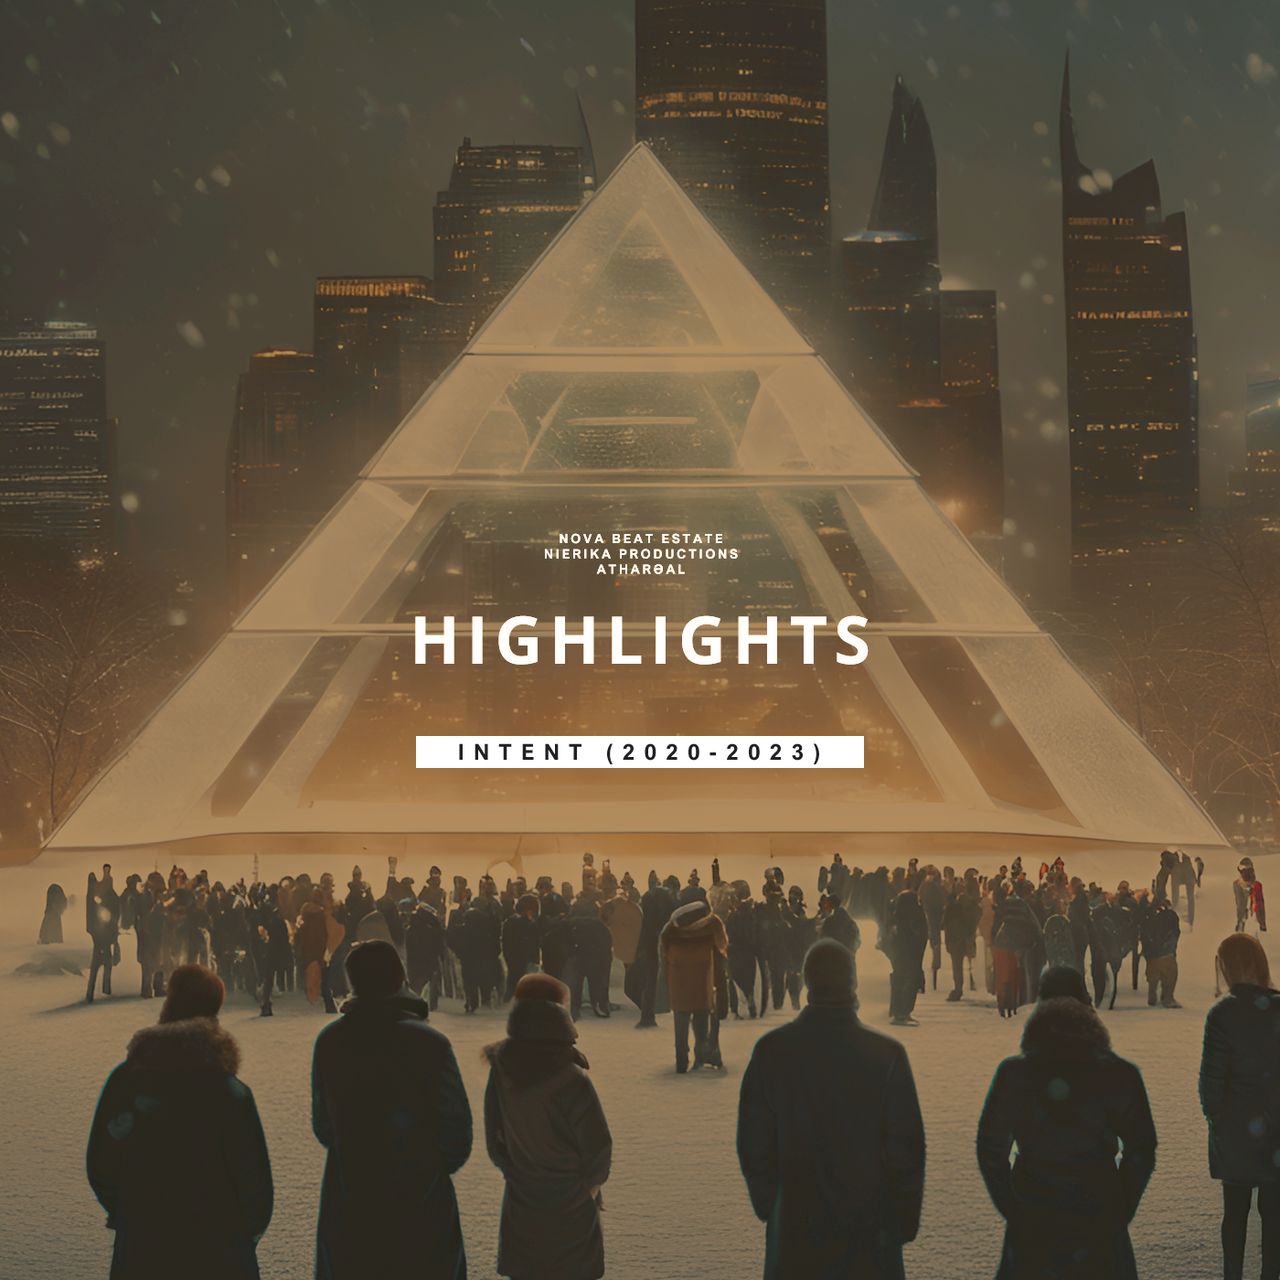 A group of people staring at a huge glowing translucent pyramid installation at a modern city square.